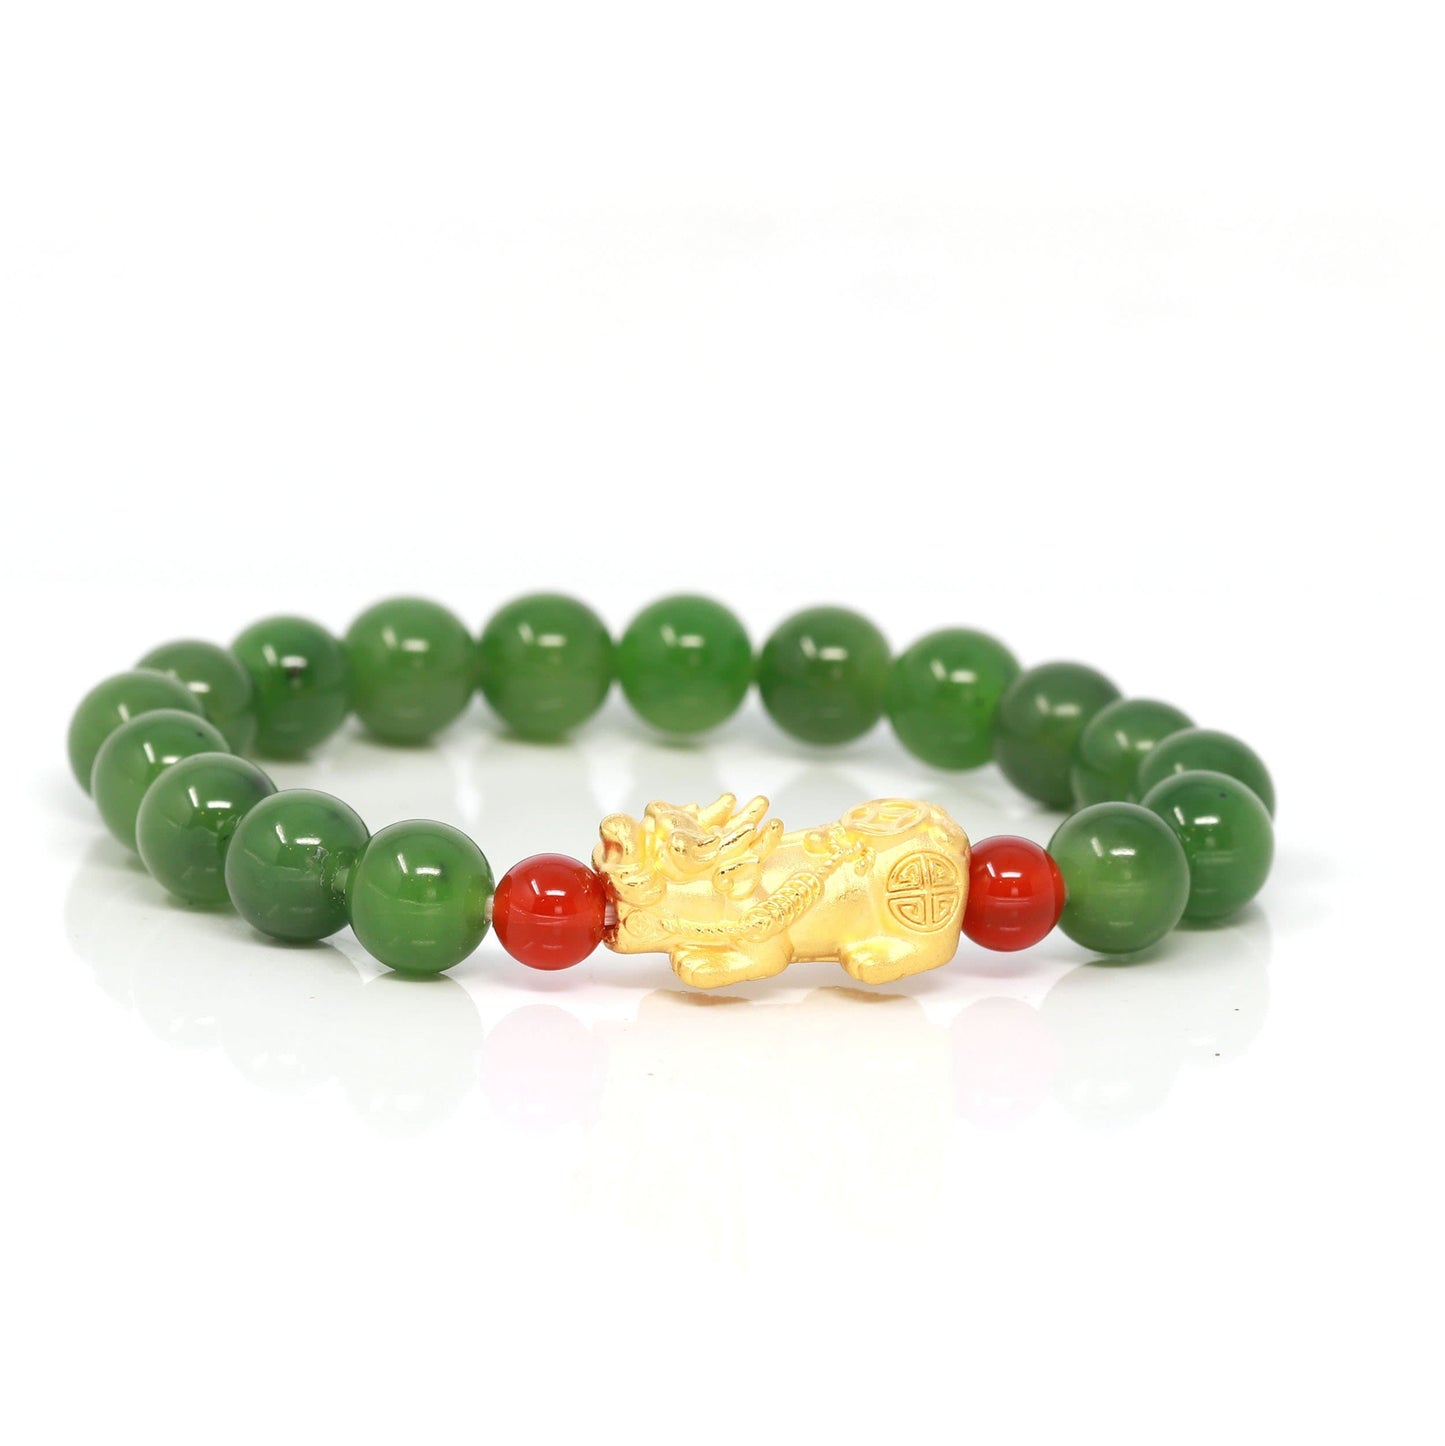 Chinese Jade Bracelets for Sale at Online Auction  Modern  Antique Chinese  Jade Bracelets